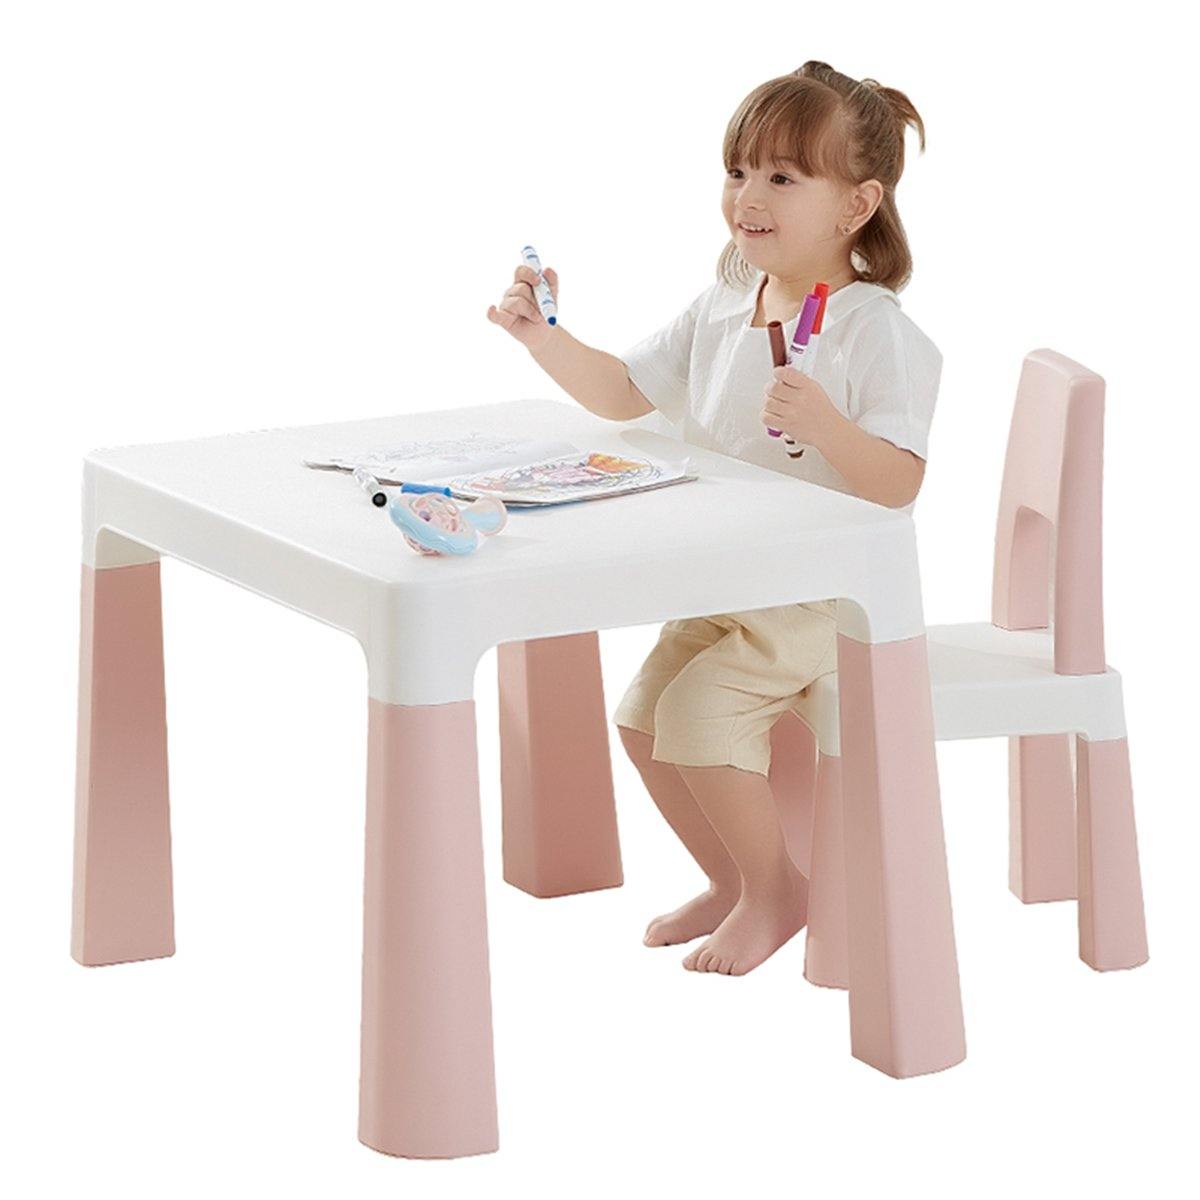 Children Table & Chair Set - Kids Plastic Drawing Writing/Dining Desk